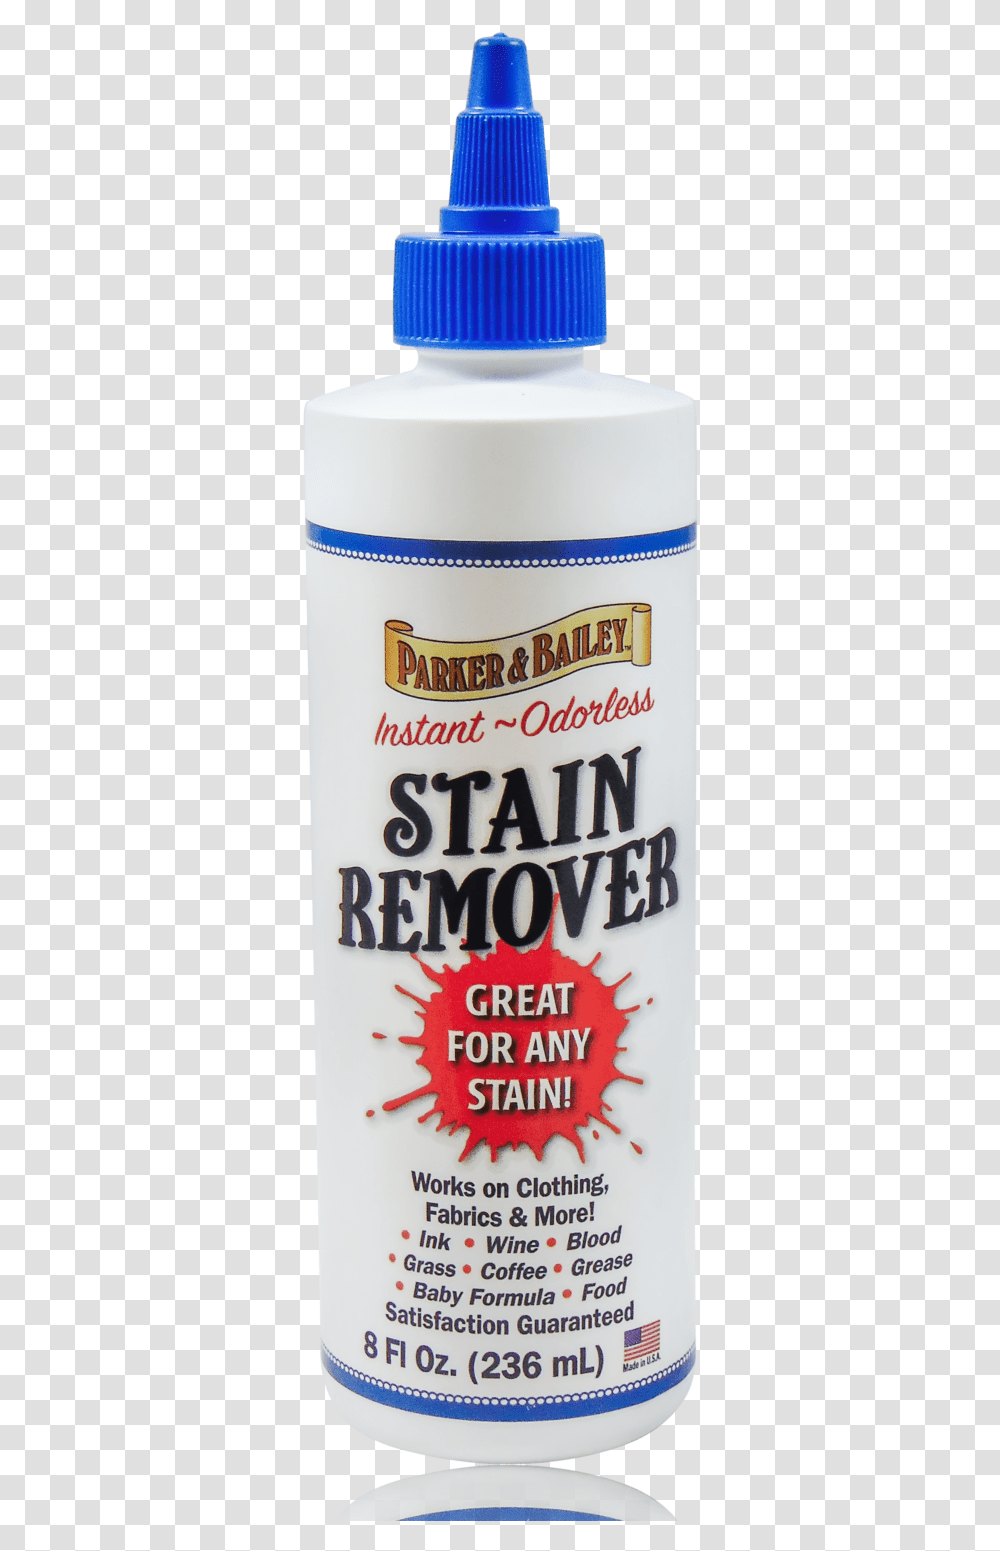 Parker And Bailey Stain Remover Bottle, Beer, Alcohol, Beverage, Liquor Transparent Png